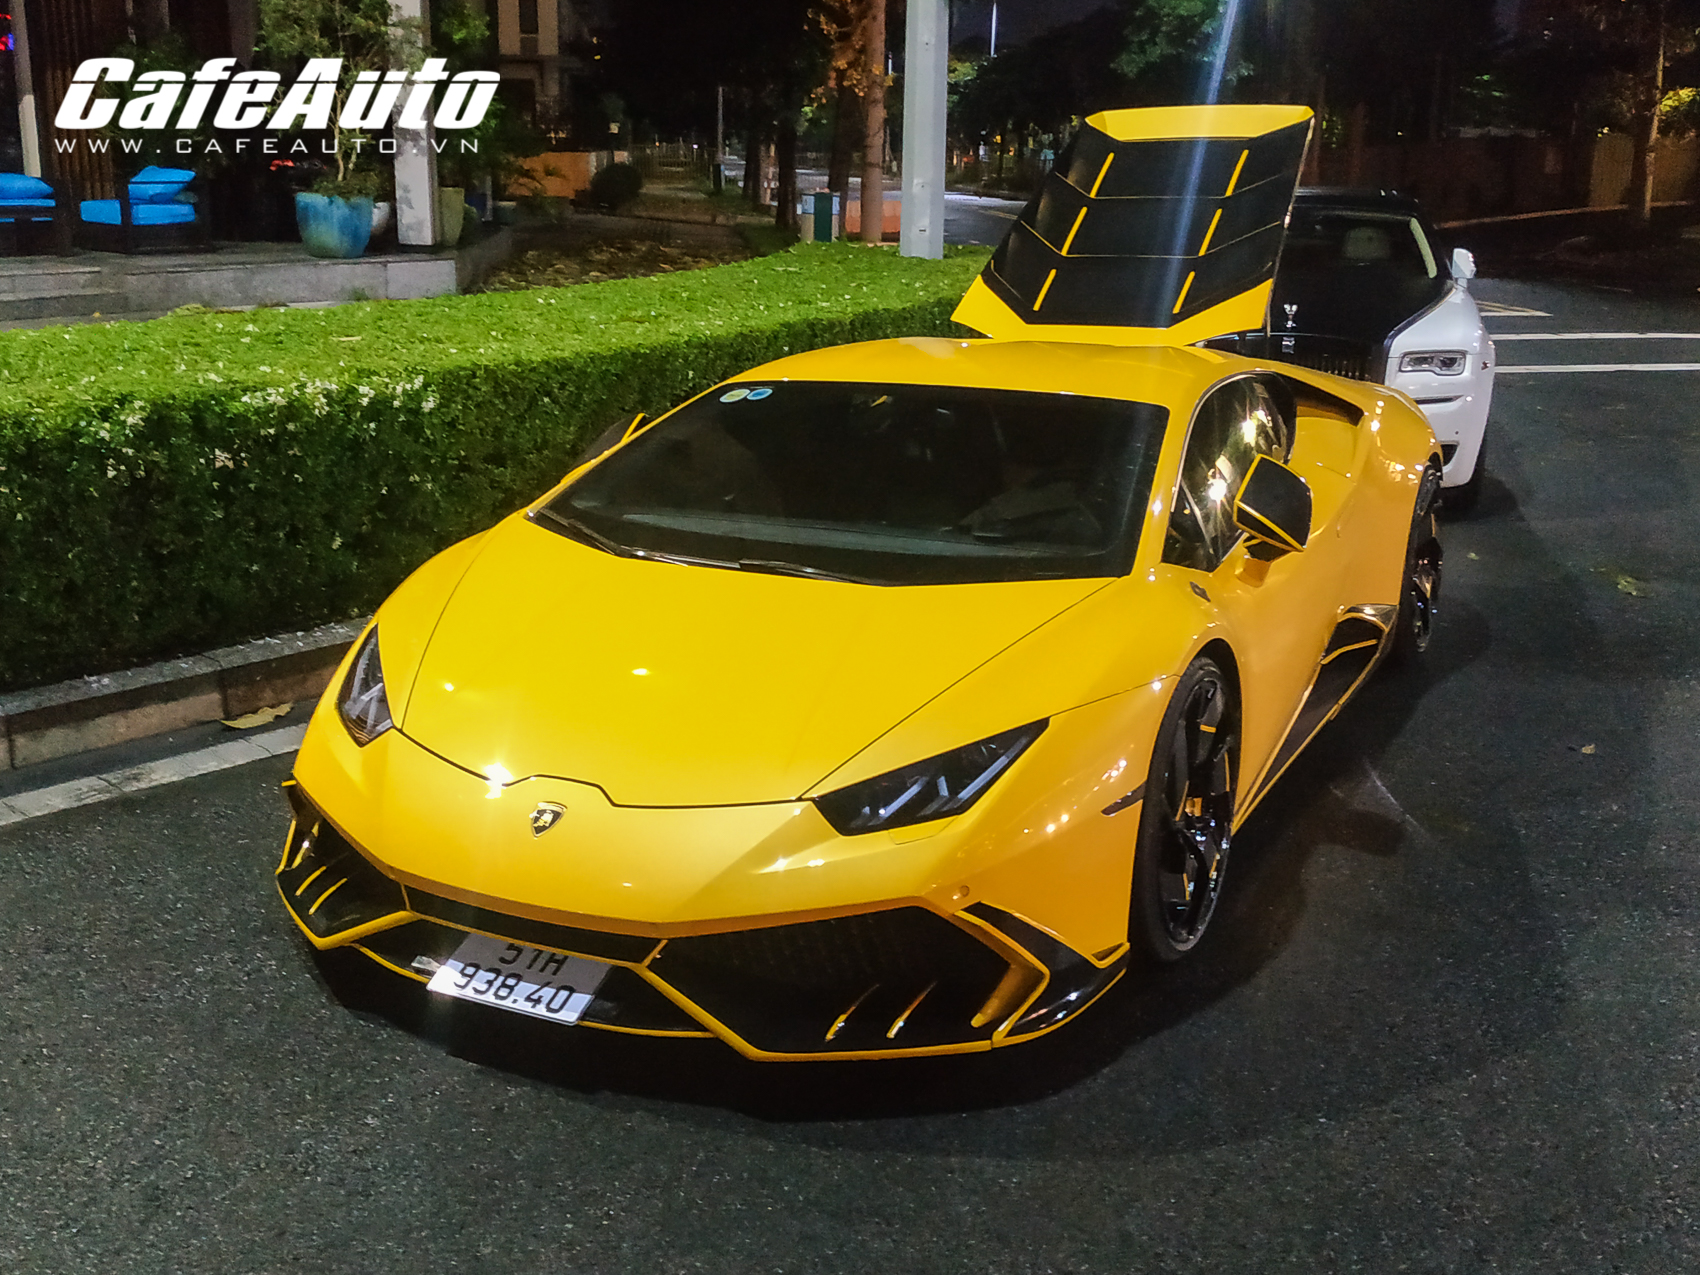 huracanmansory-cafeautovn-18